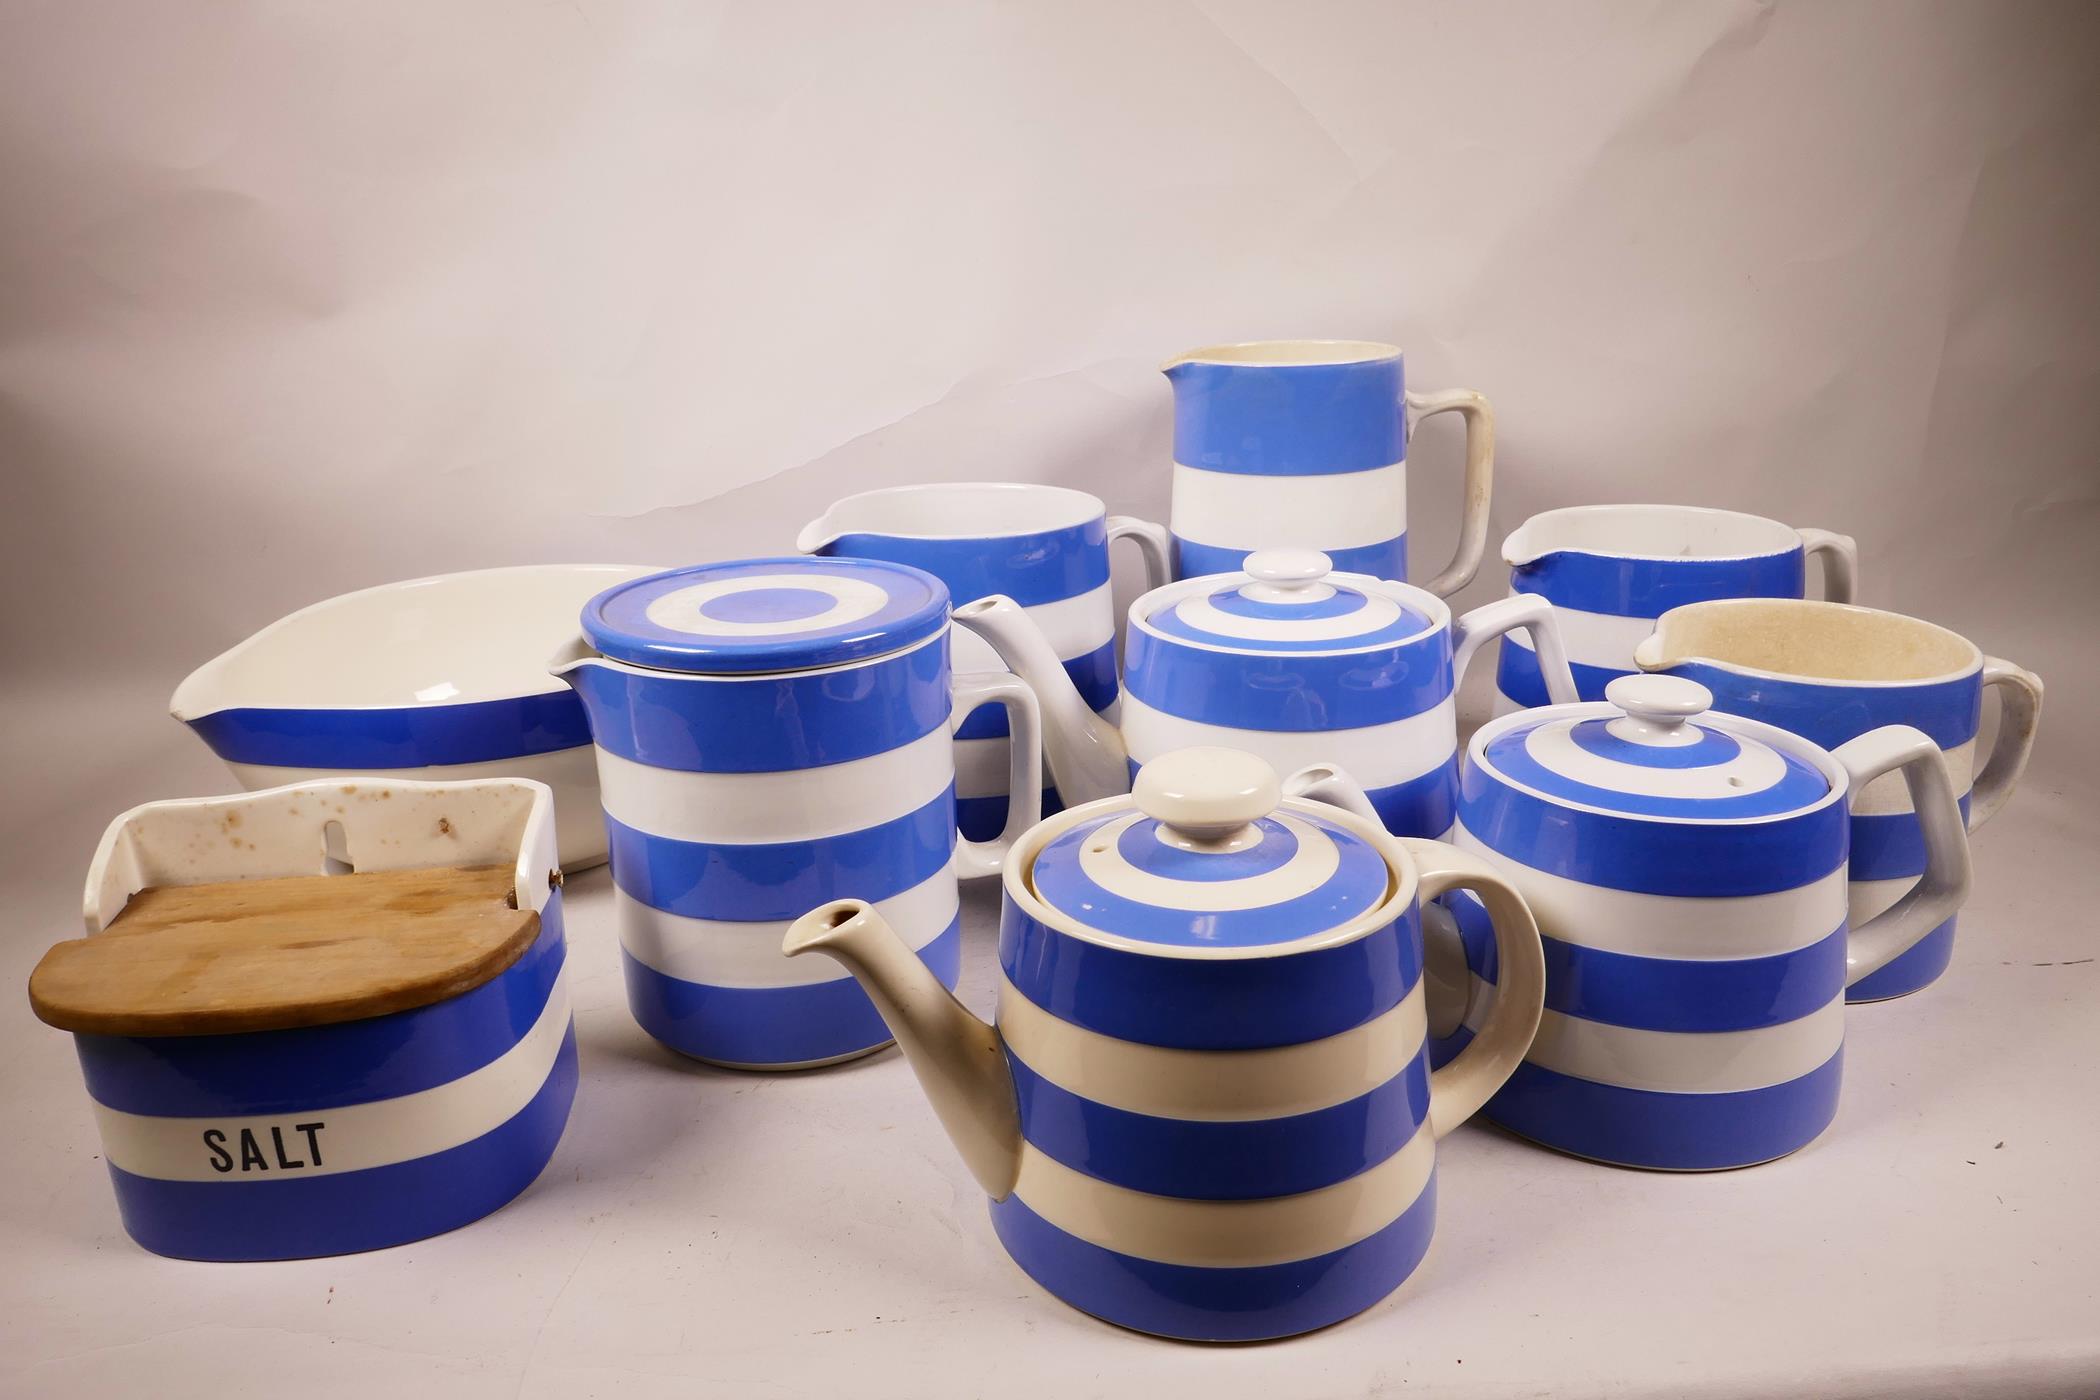 Ten large pieces of T.G. Green and Co. Cornish ware, blue and white, including three teapots, a